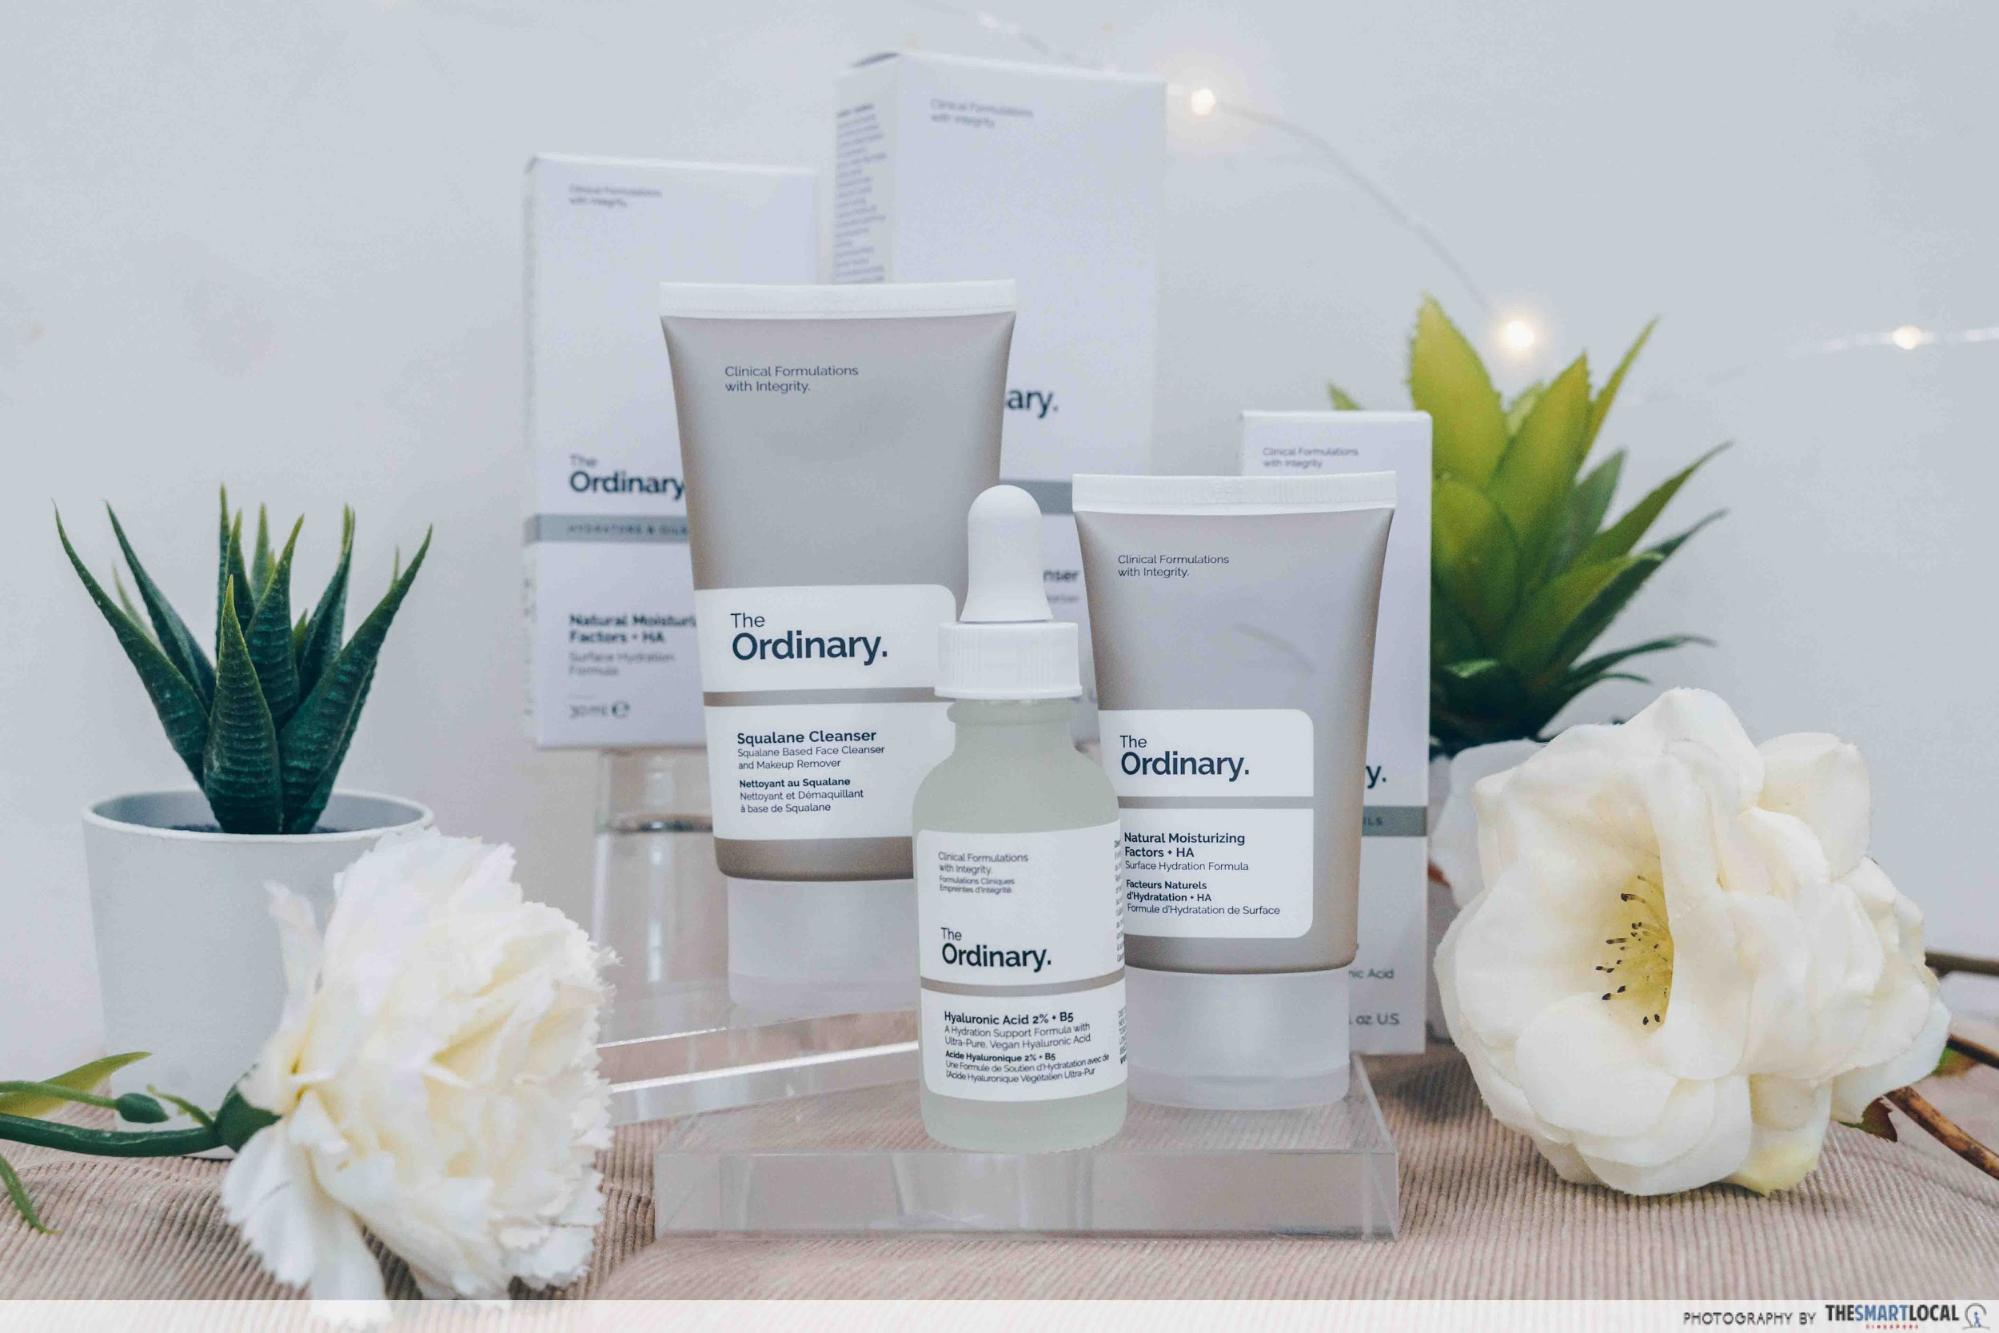 The Ordinary products